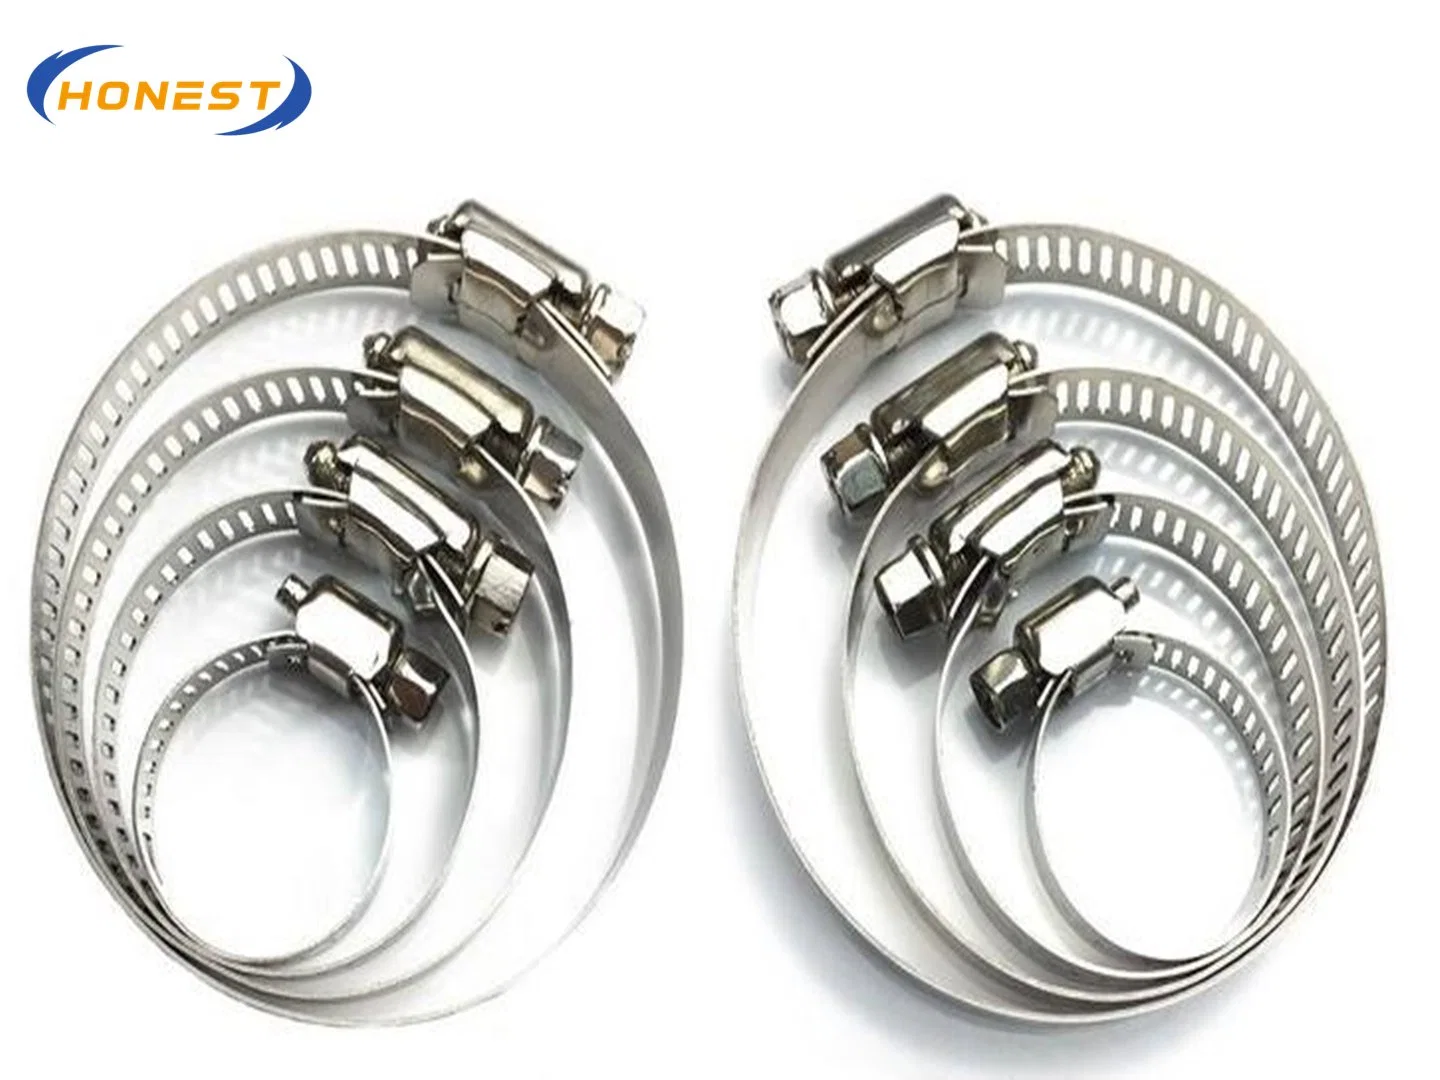 Hot Selling American Type Hose Clamp